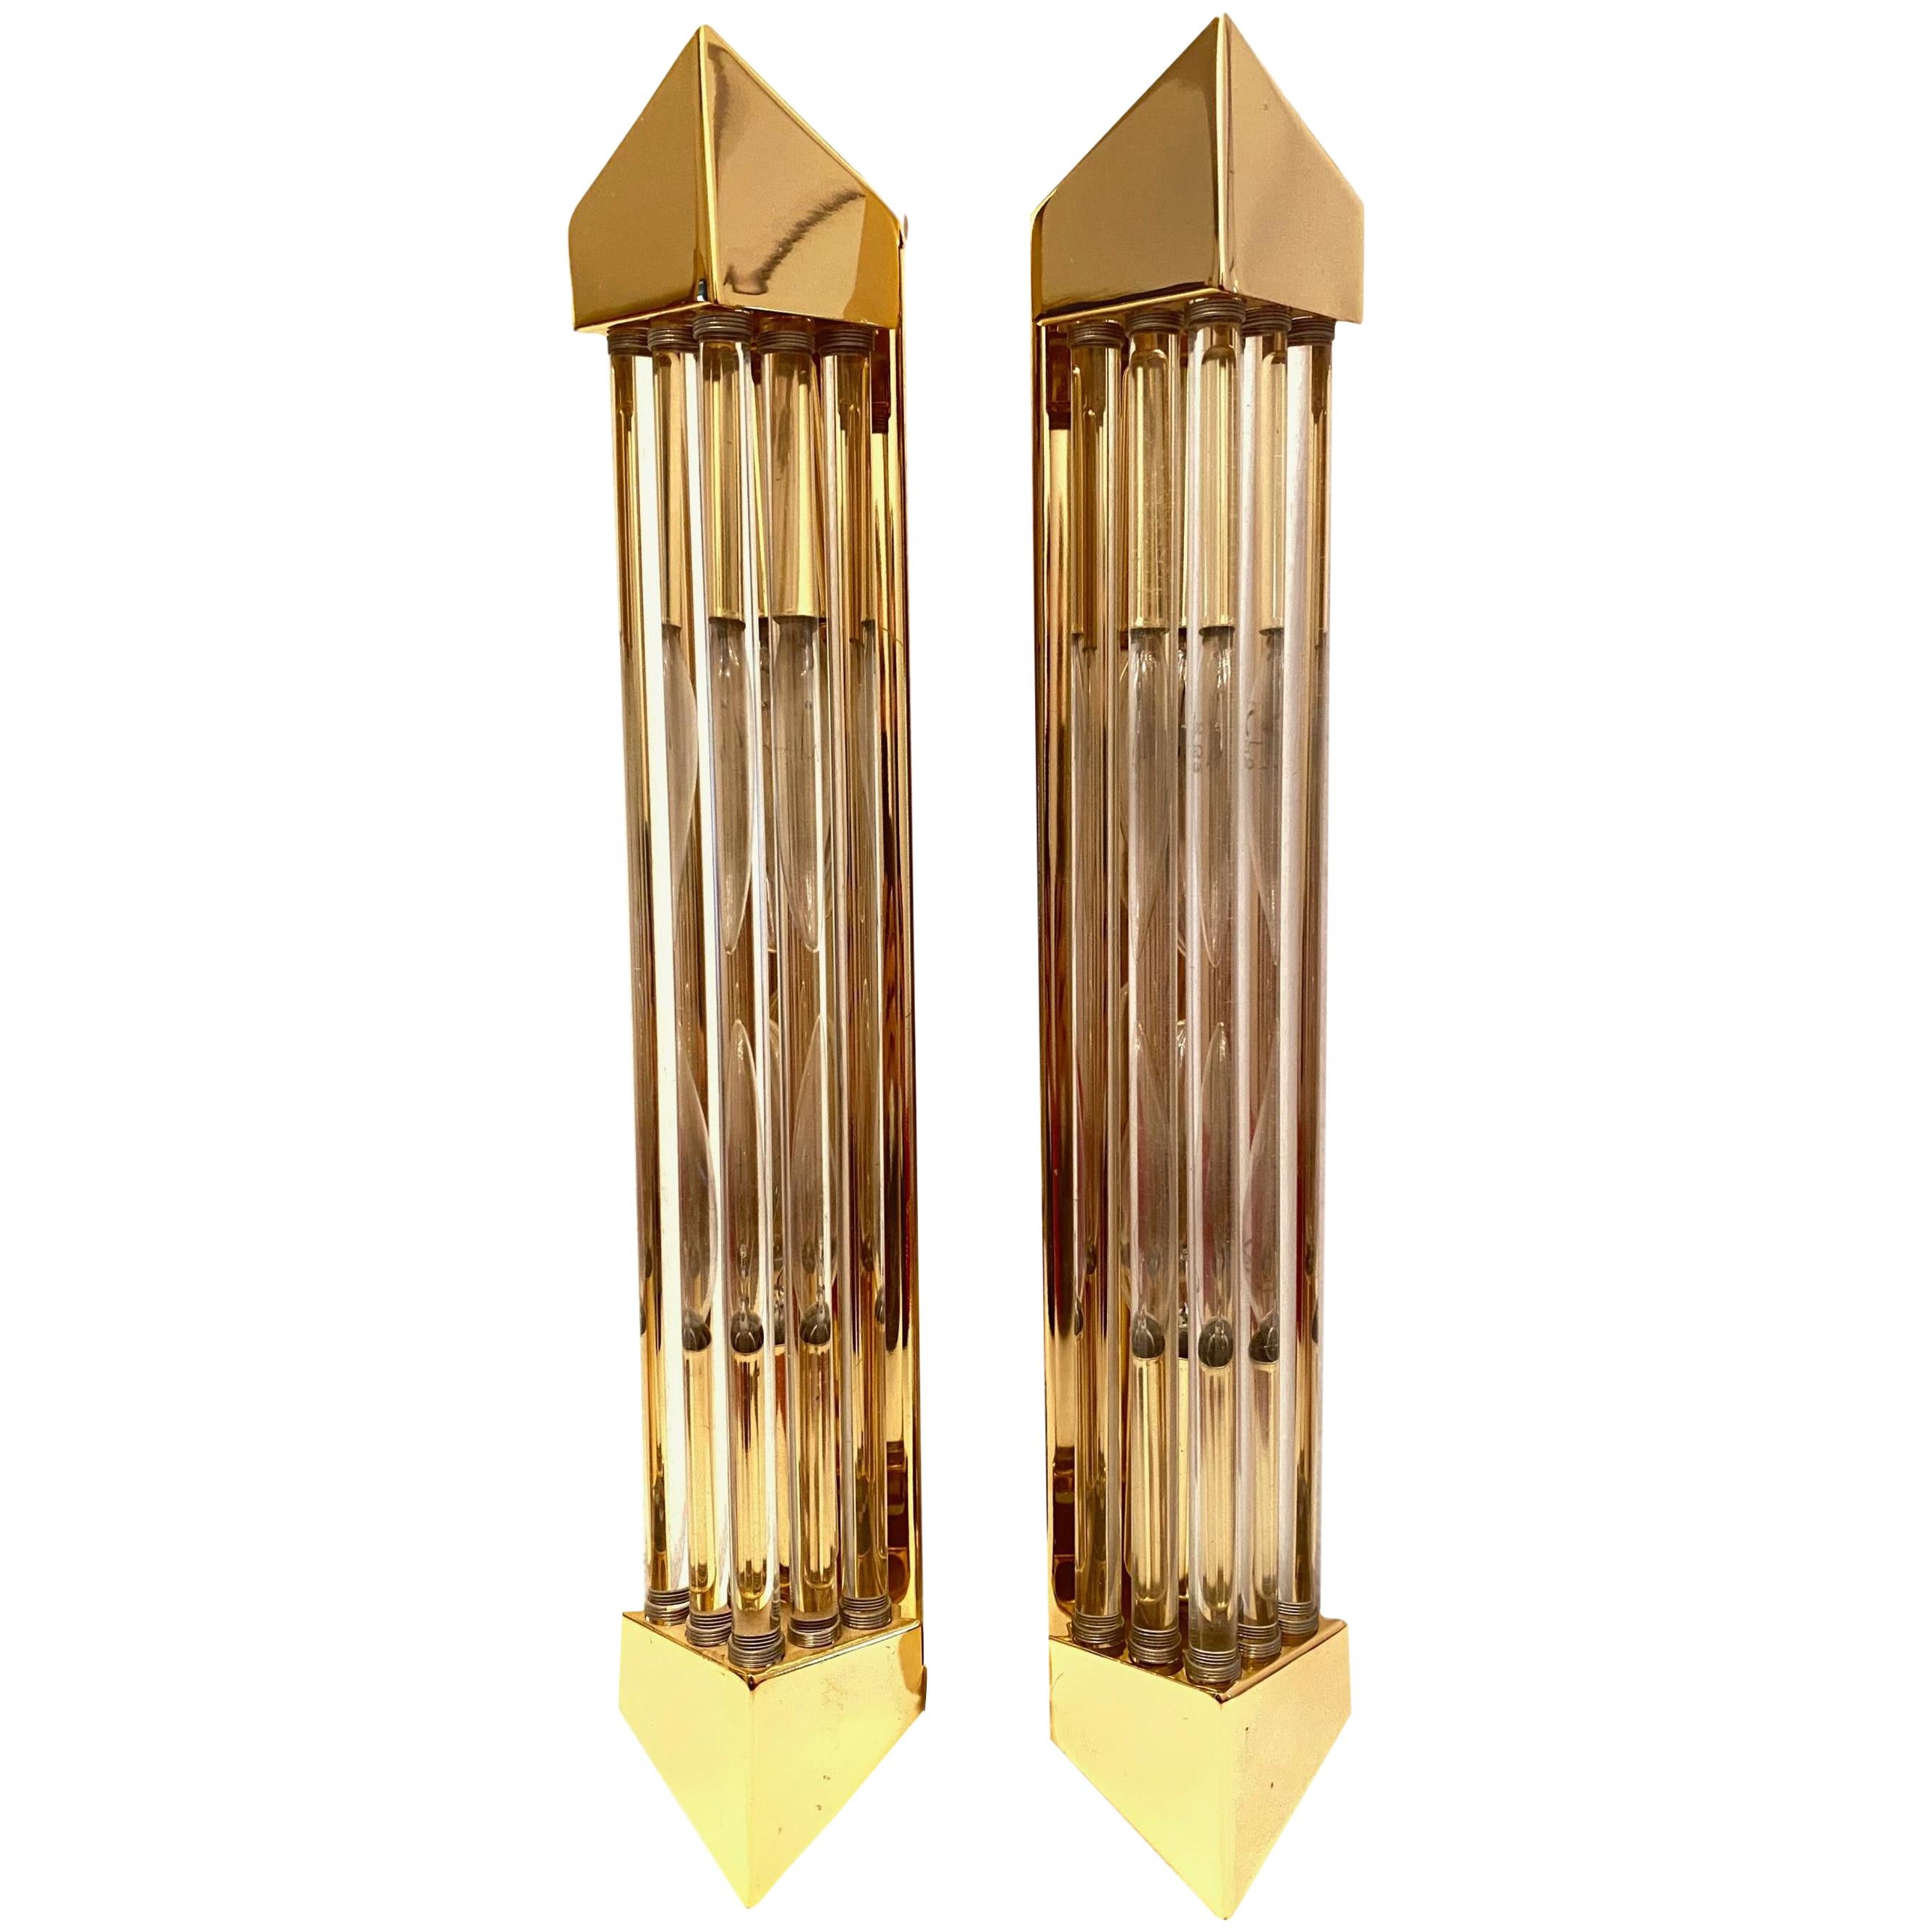 Pair of Brass and Glass Rod Wall Sconces Art Deco Style, Honsel, Germany